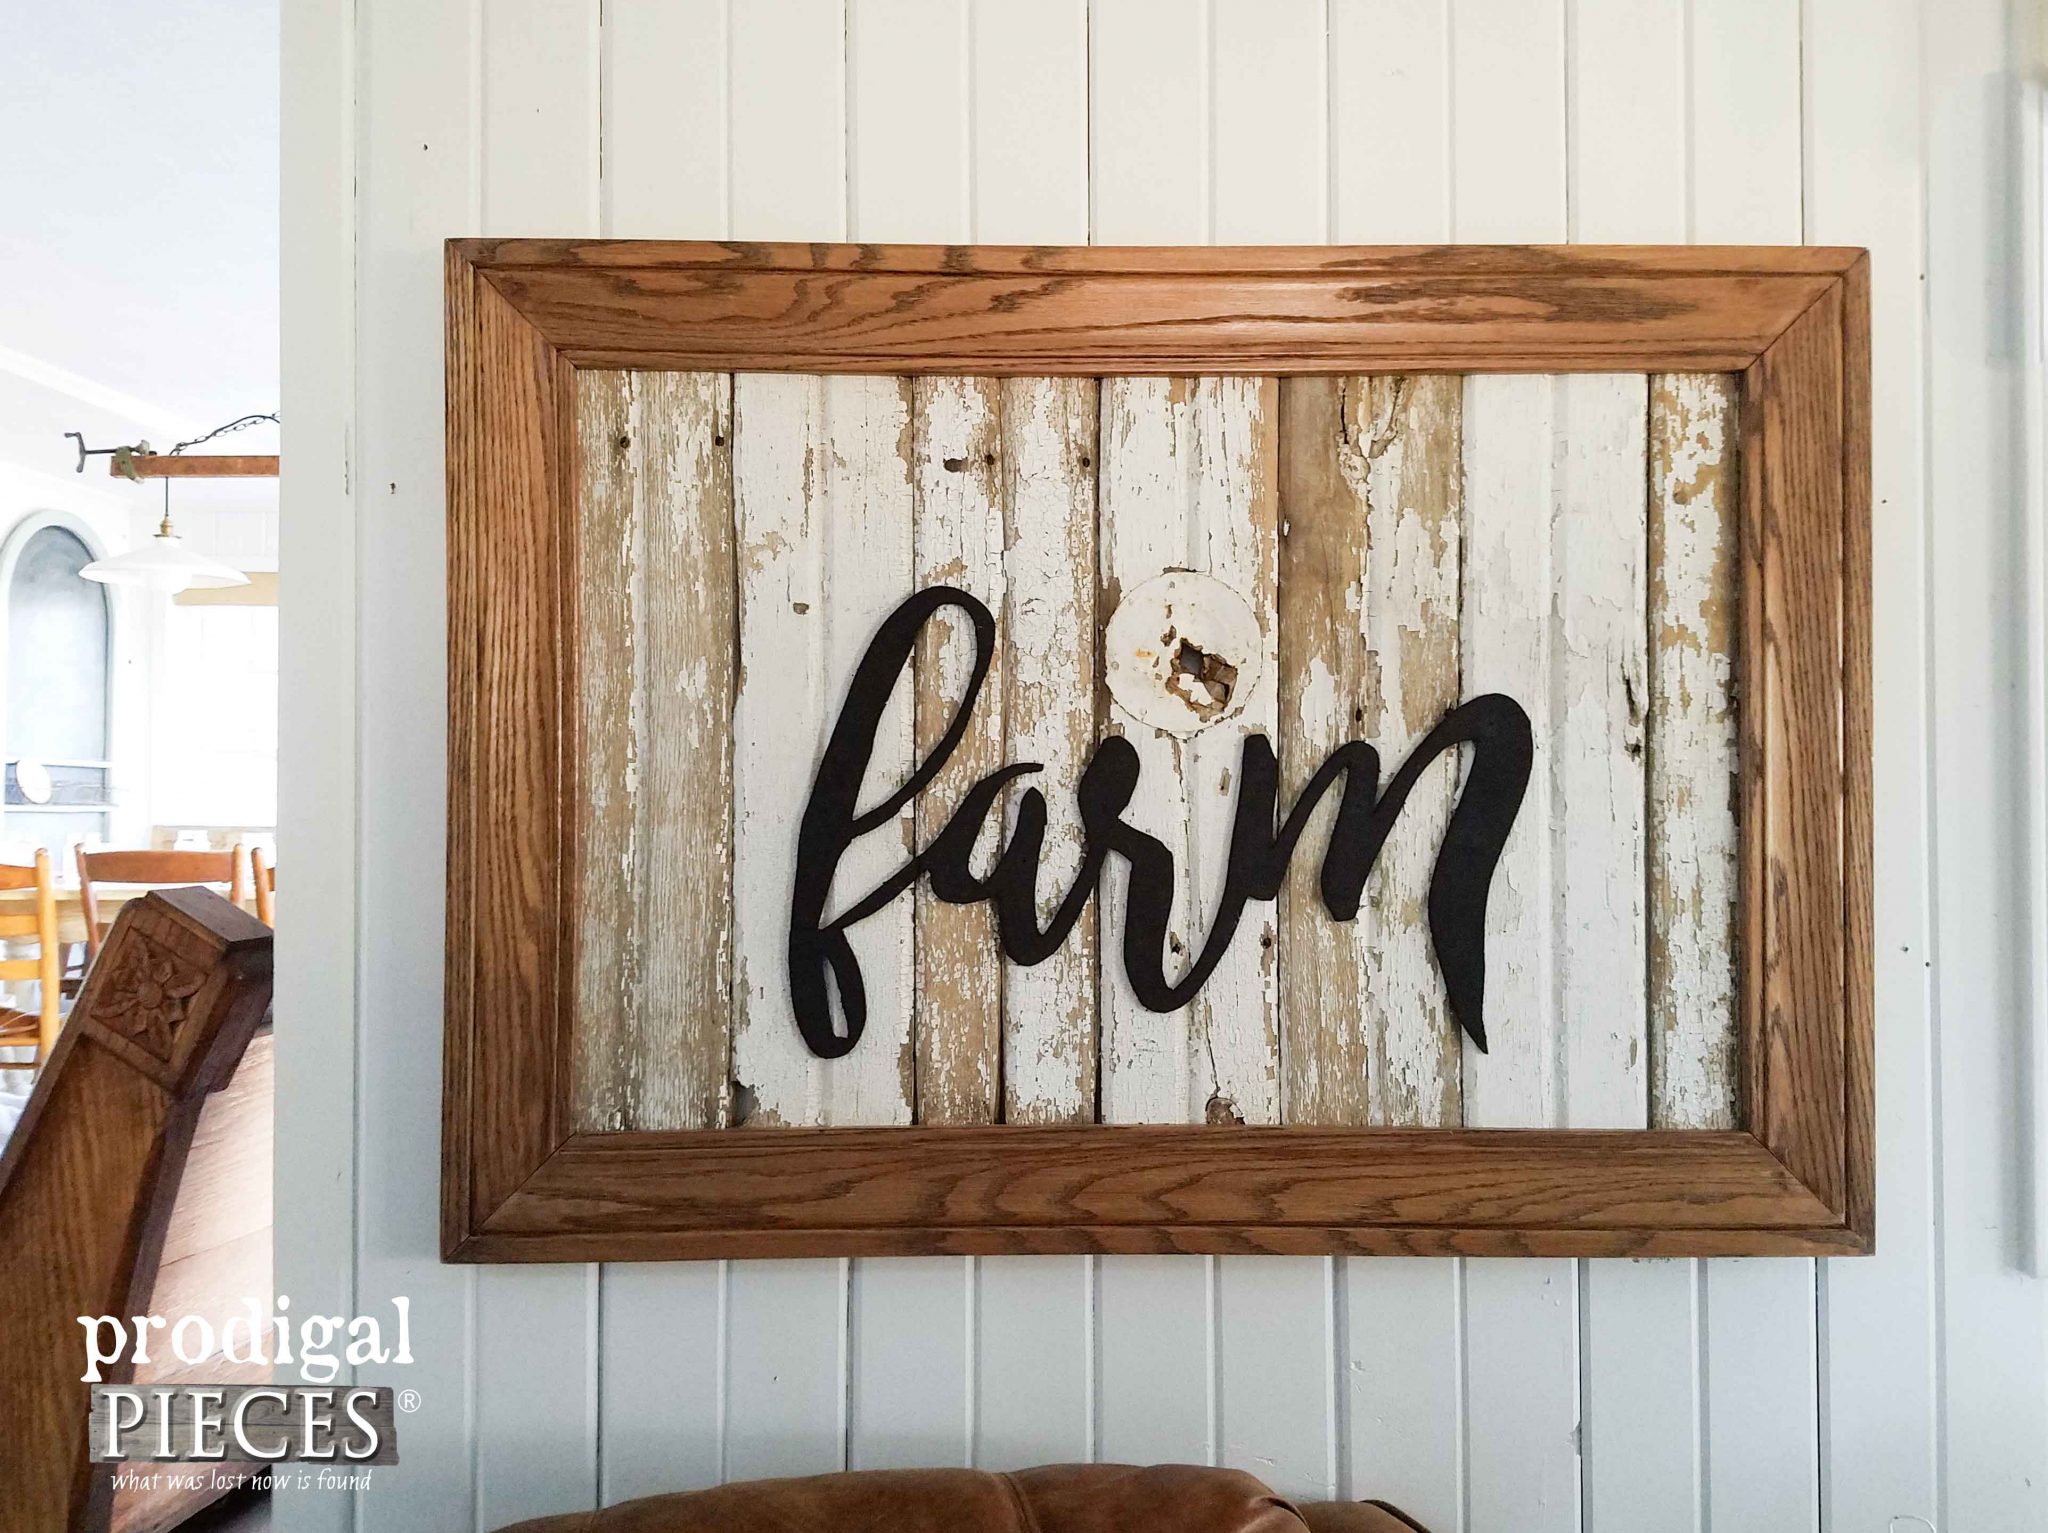 Reclaimed Wood "Farm" Sign by Prodigal Pieces | prodigalpieces.com